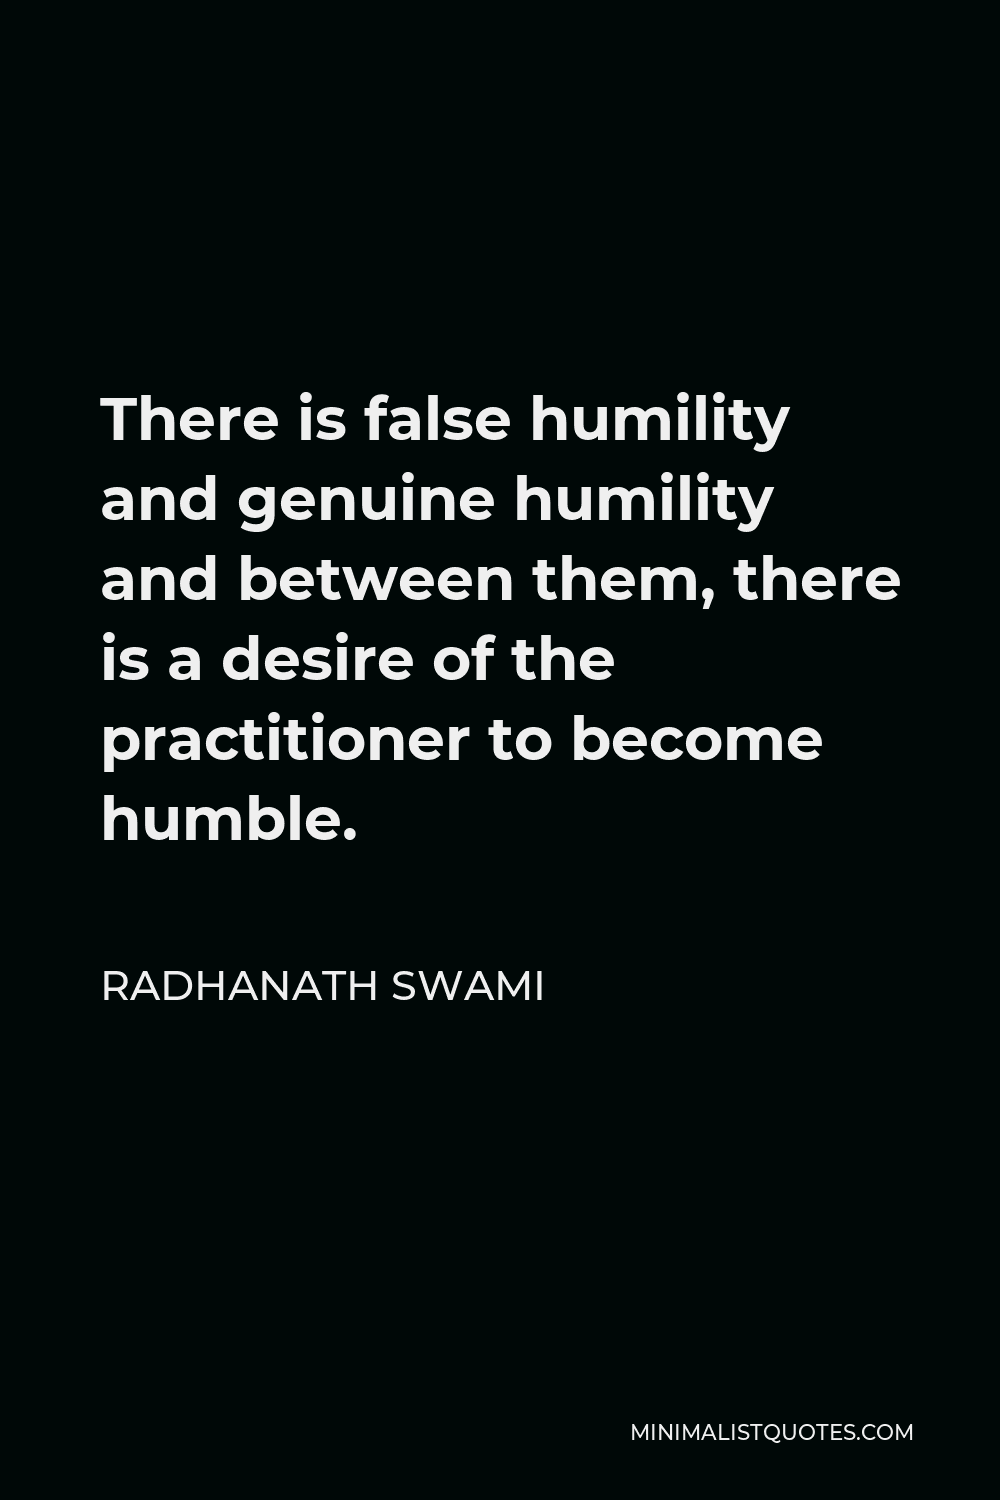 Radhanath Swami Quote - There is false humility and genuine humility and between them, there is a desire of the practitioner to become humble.